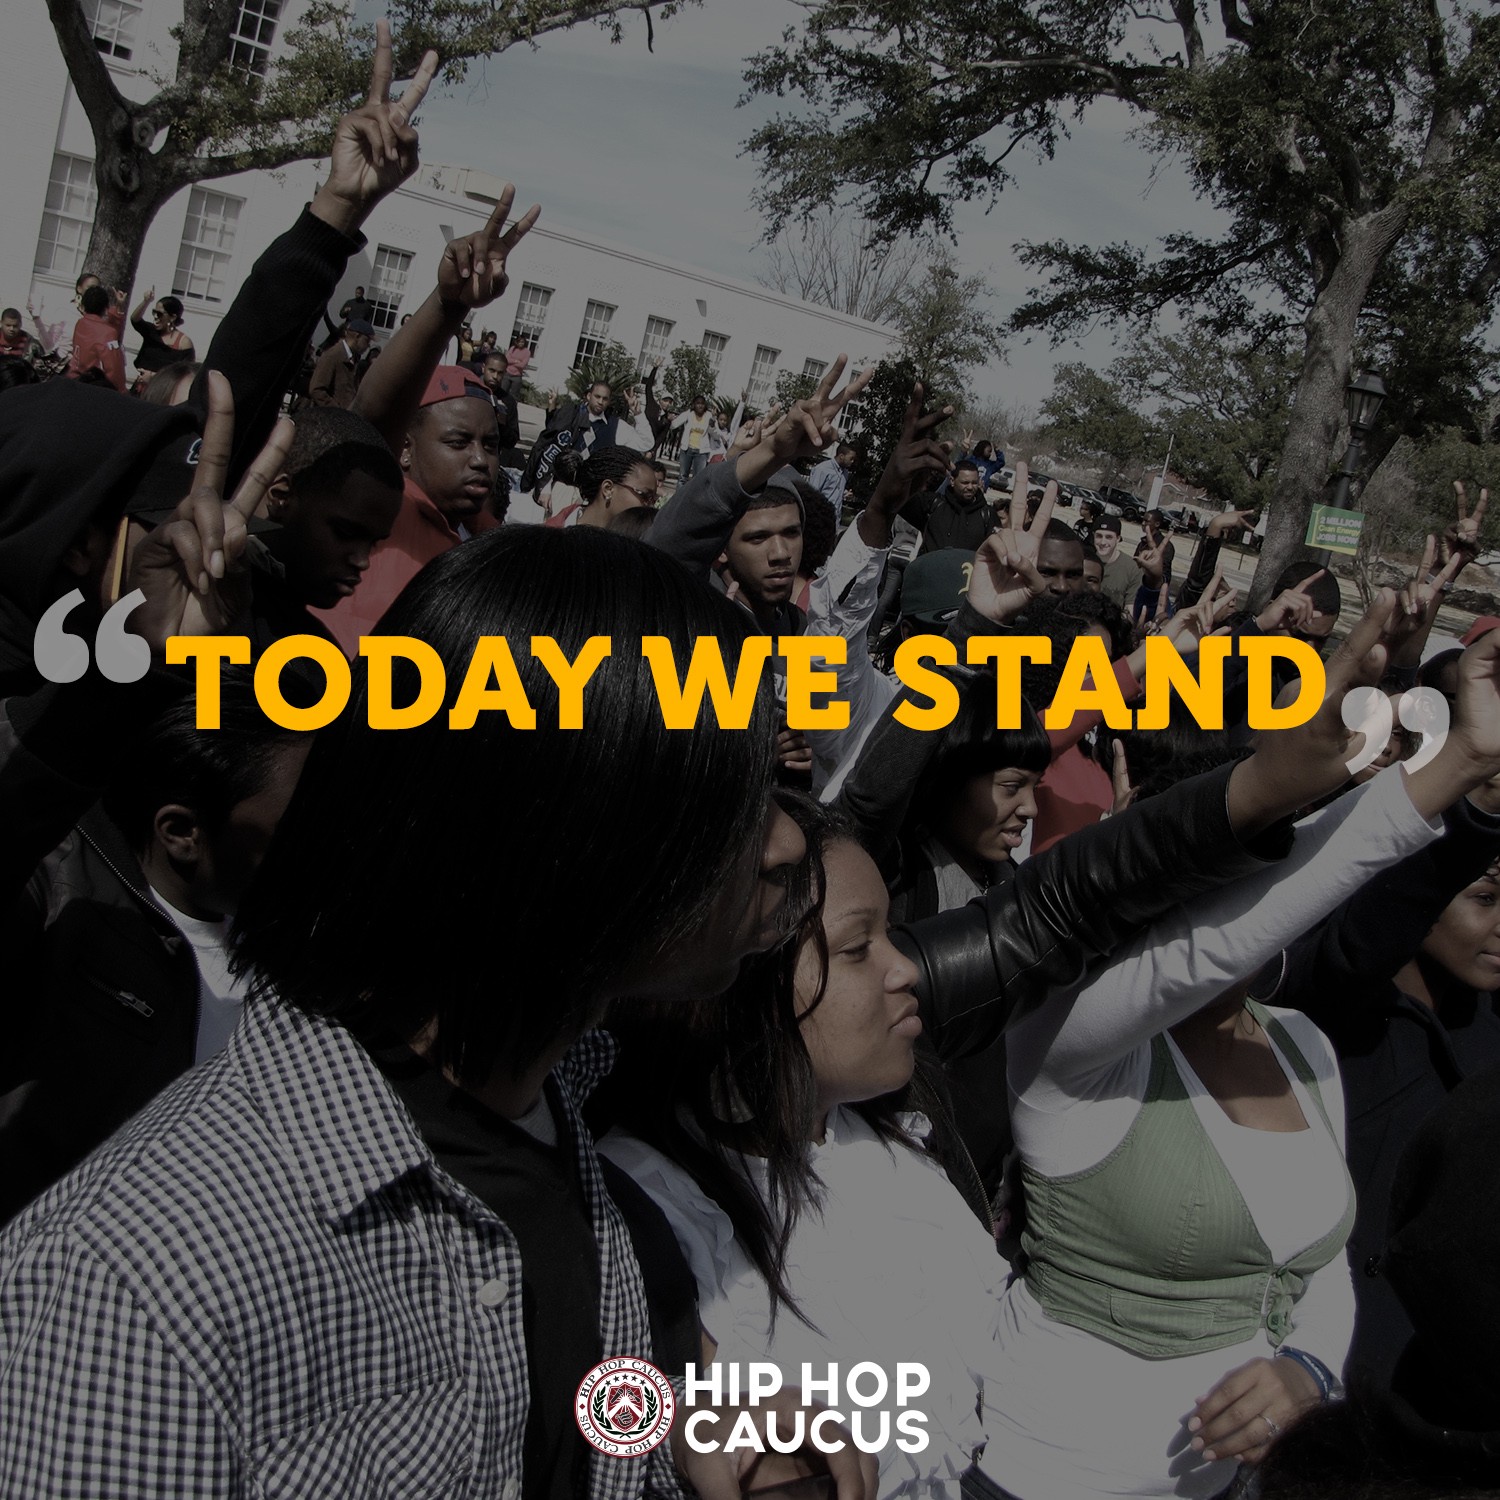 It’s Time to Stand Up! (A Manifesto from the People)